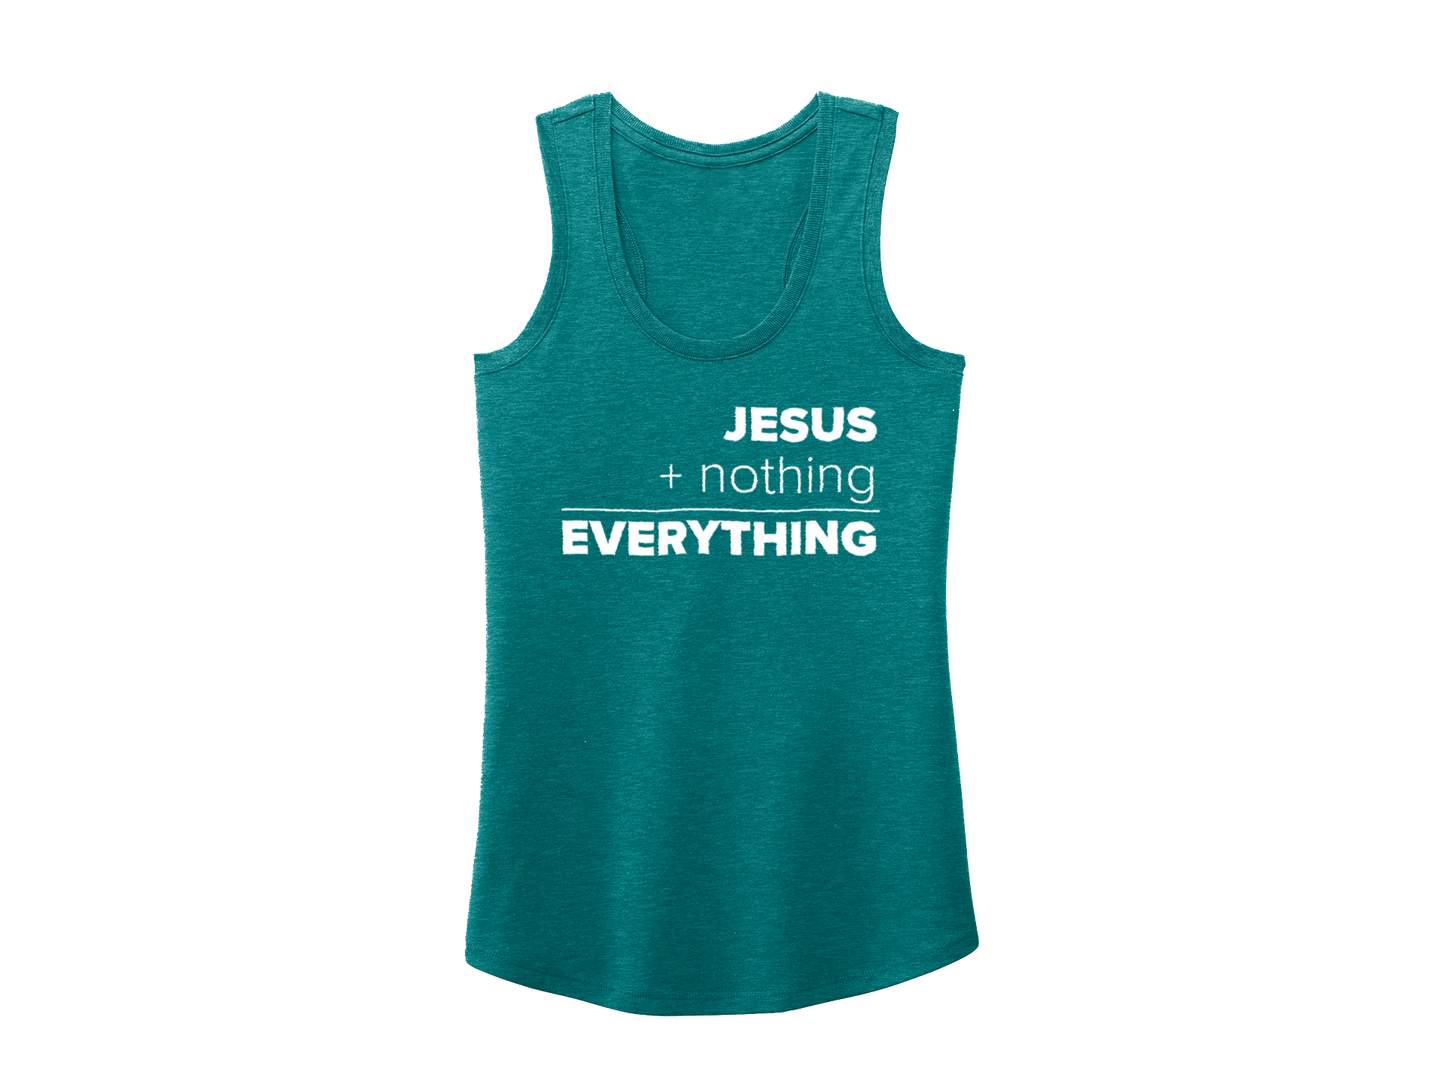 JESUS EQUALS EVERYTHING TANK GREEN - CHRISTIAN CLOTHING